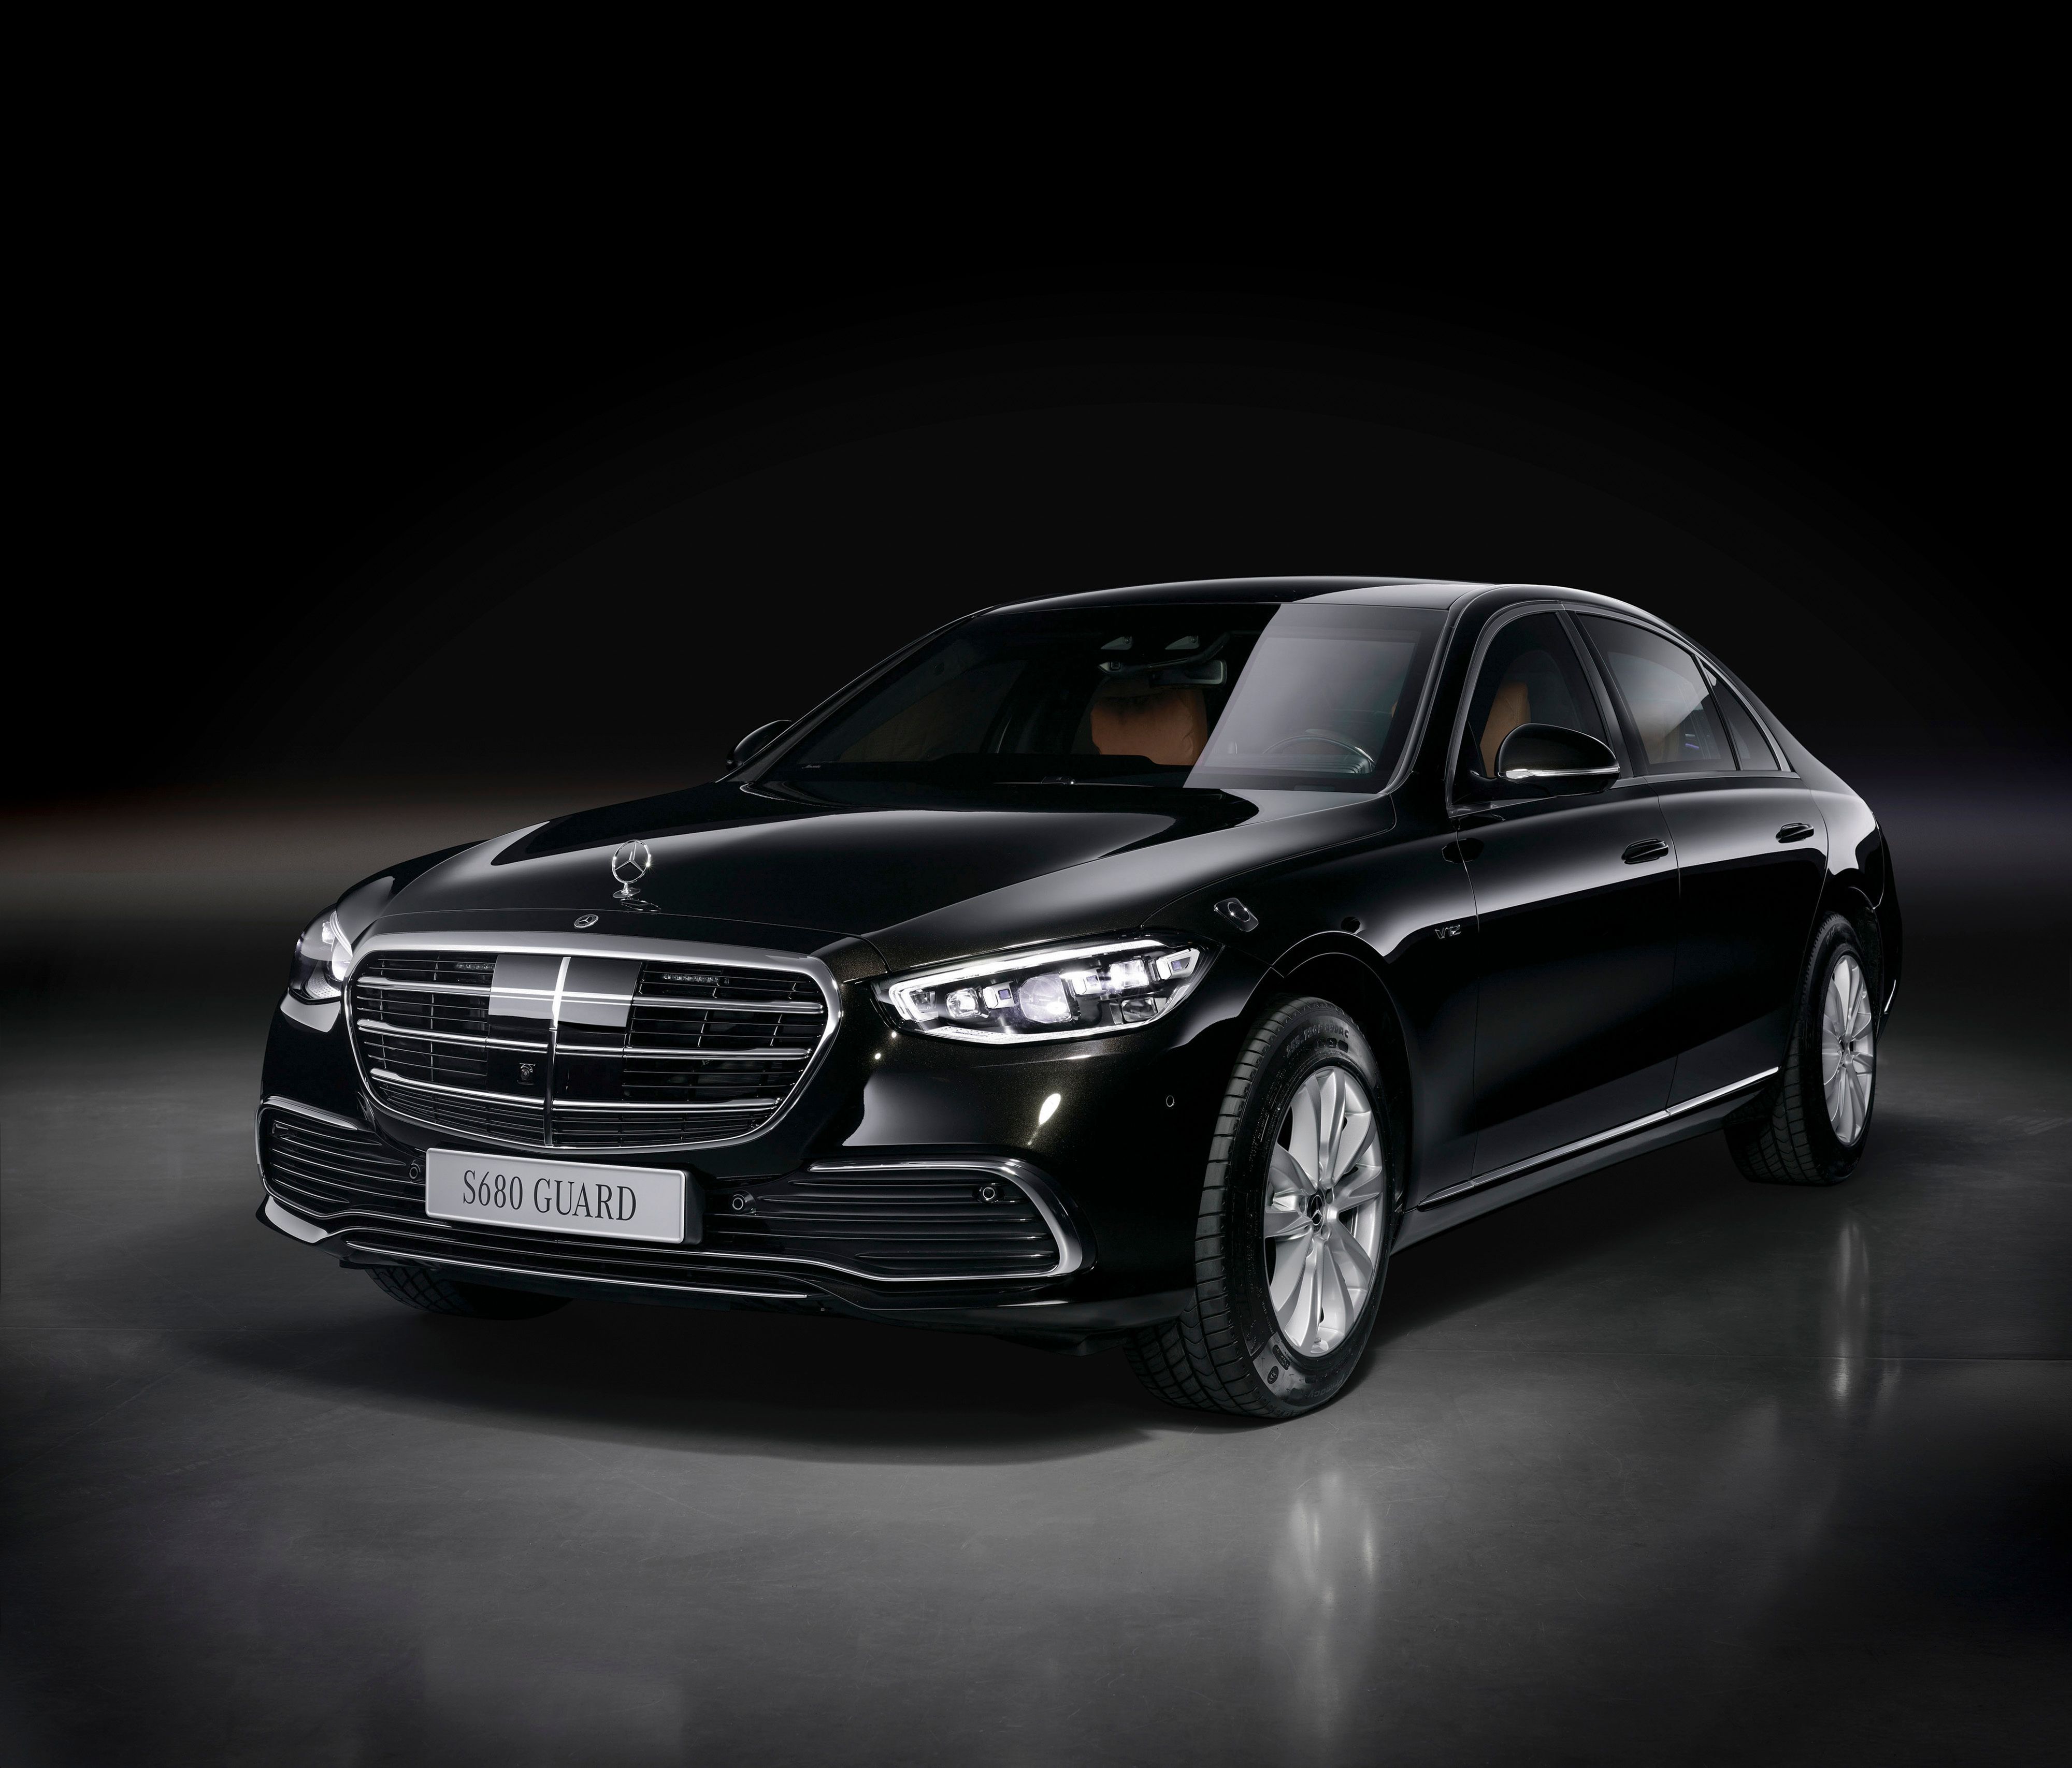 2021 Mercedes-Benz S 680 Guard 4MATIC – An Armored Car That Can Withstand Even Kalashnikov and Dragunov Sniper Rifle Shots!